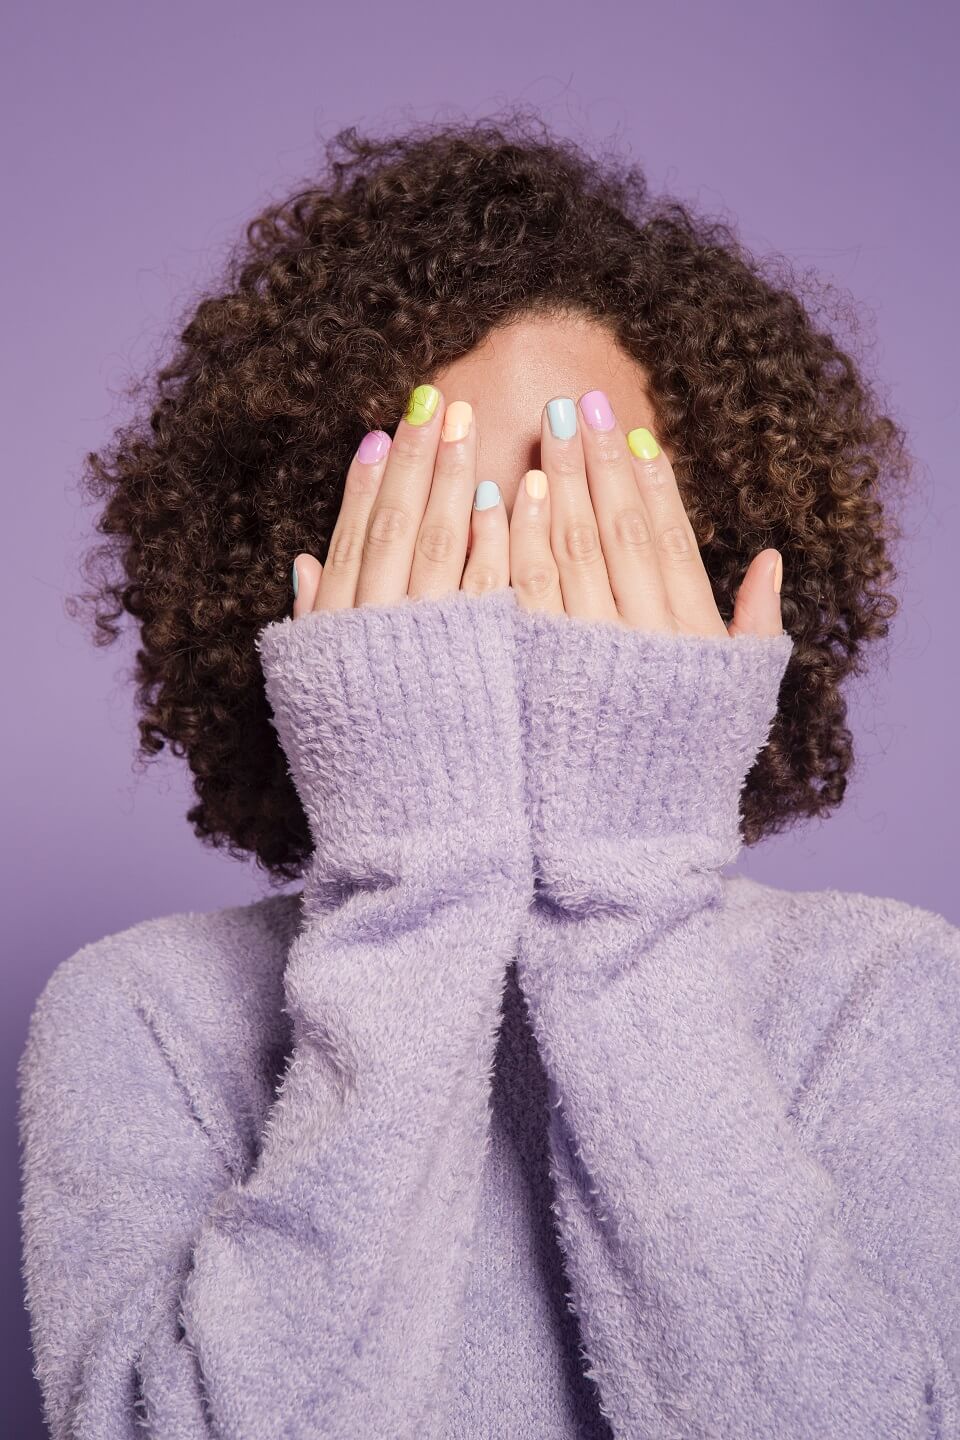 Black woman covering face with pastel nail polish on